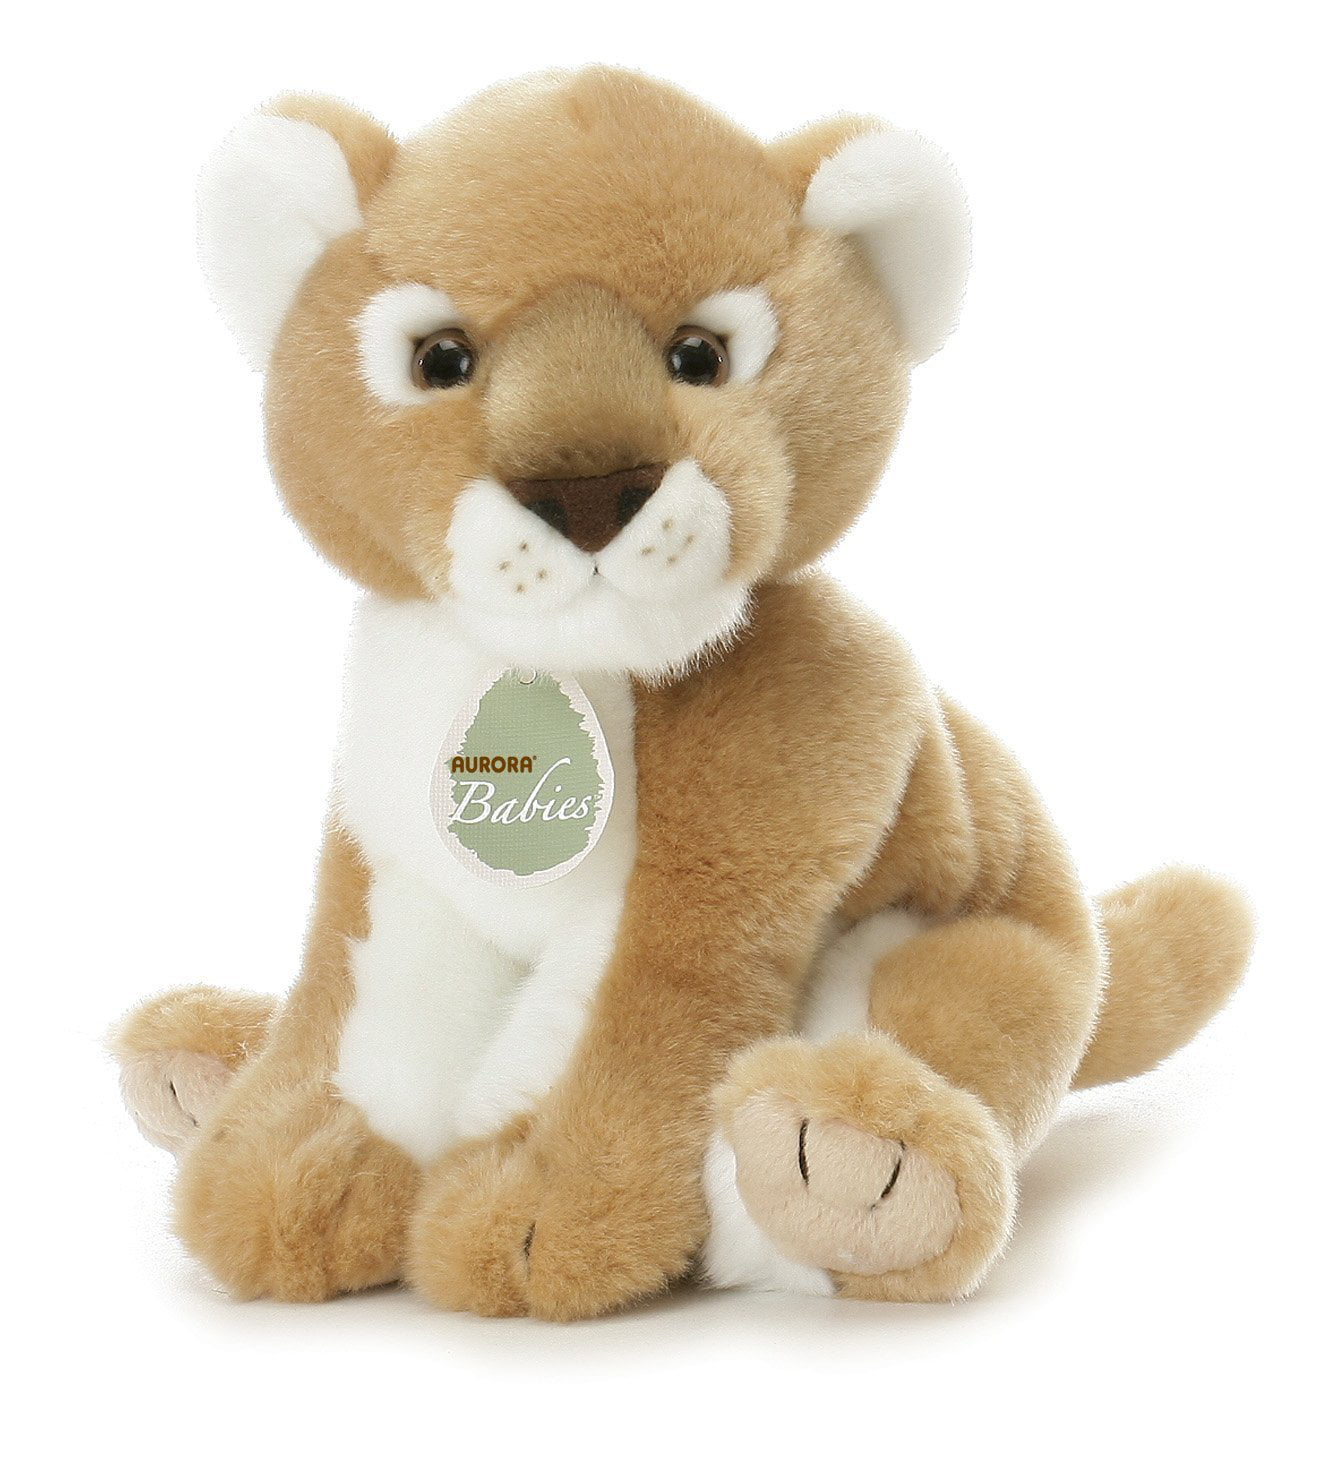 stuffed lion baby toy